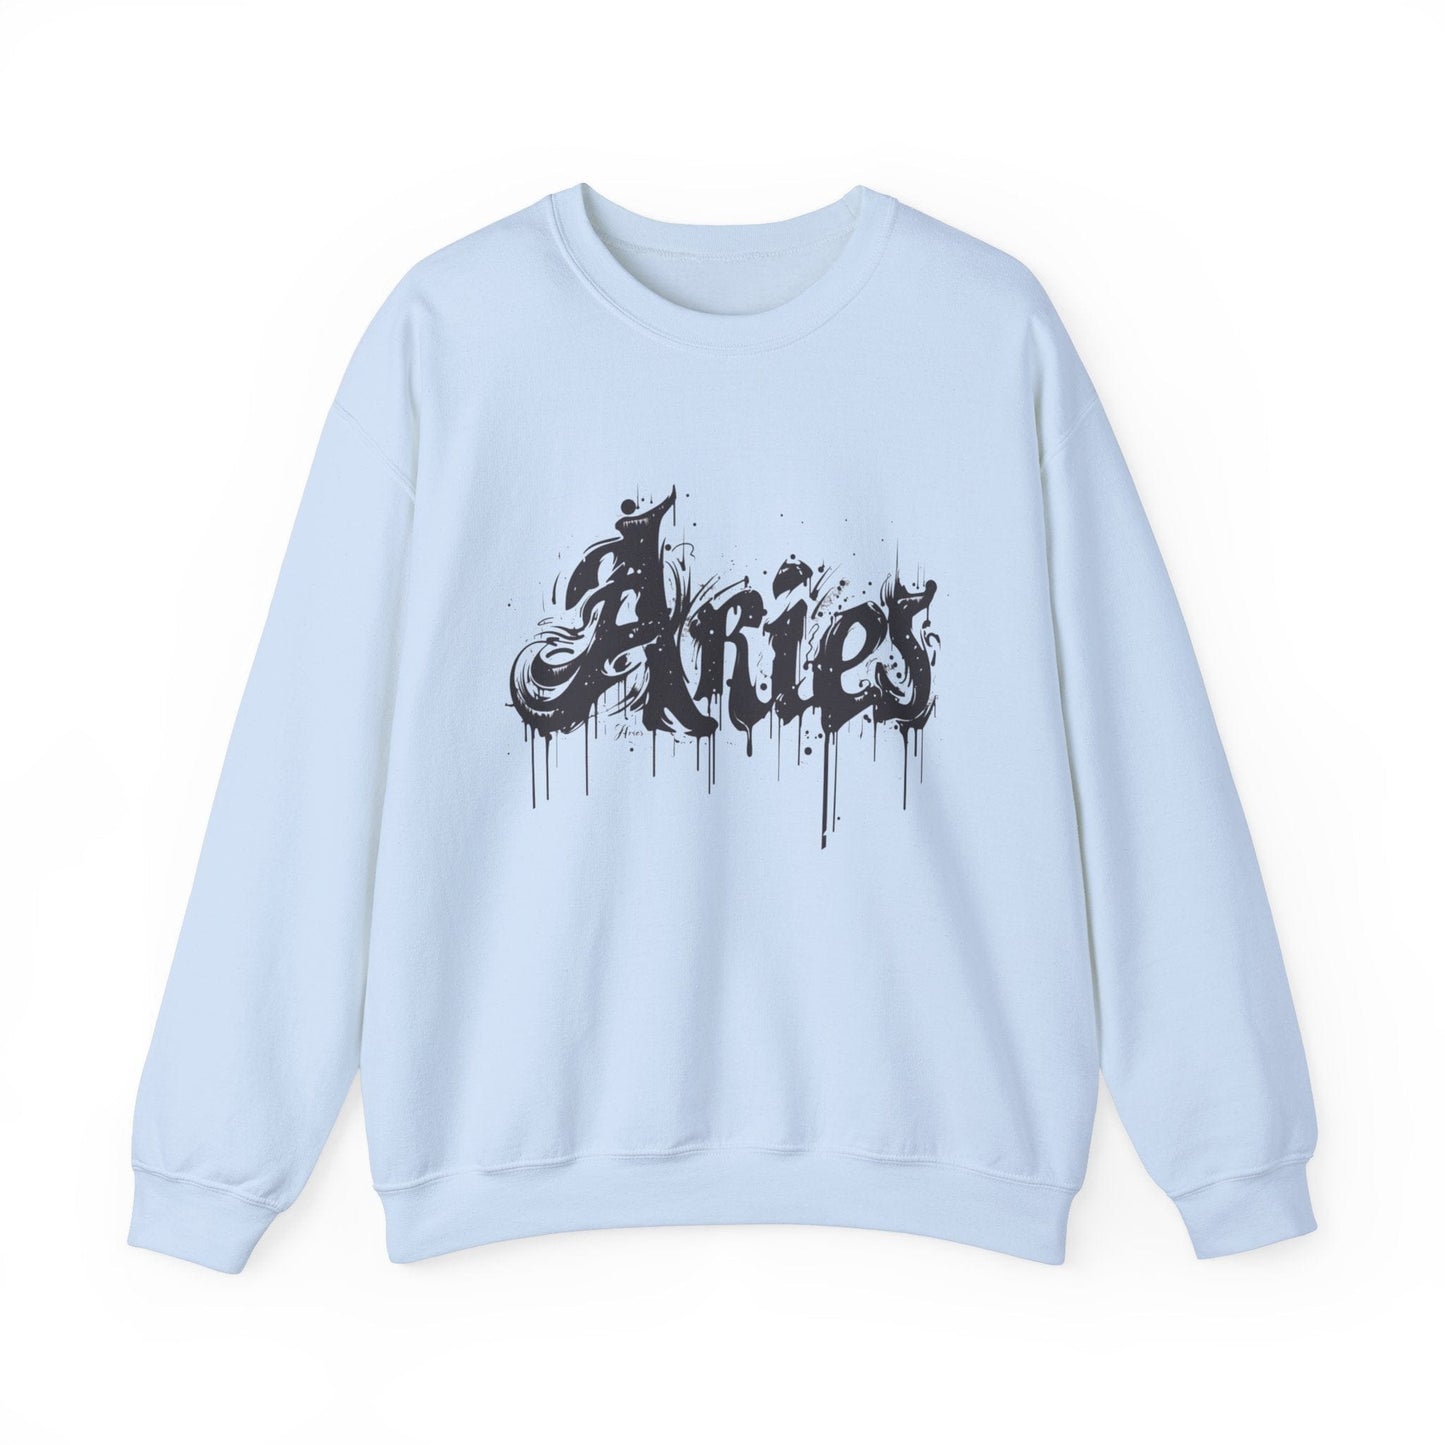 Sweatshirt S / Light Blue Ink-Dripped Aries Energy Soft Sweater: Embrace Your Fire